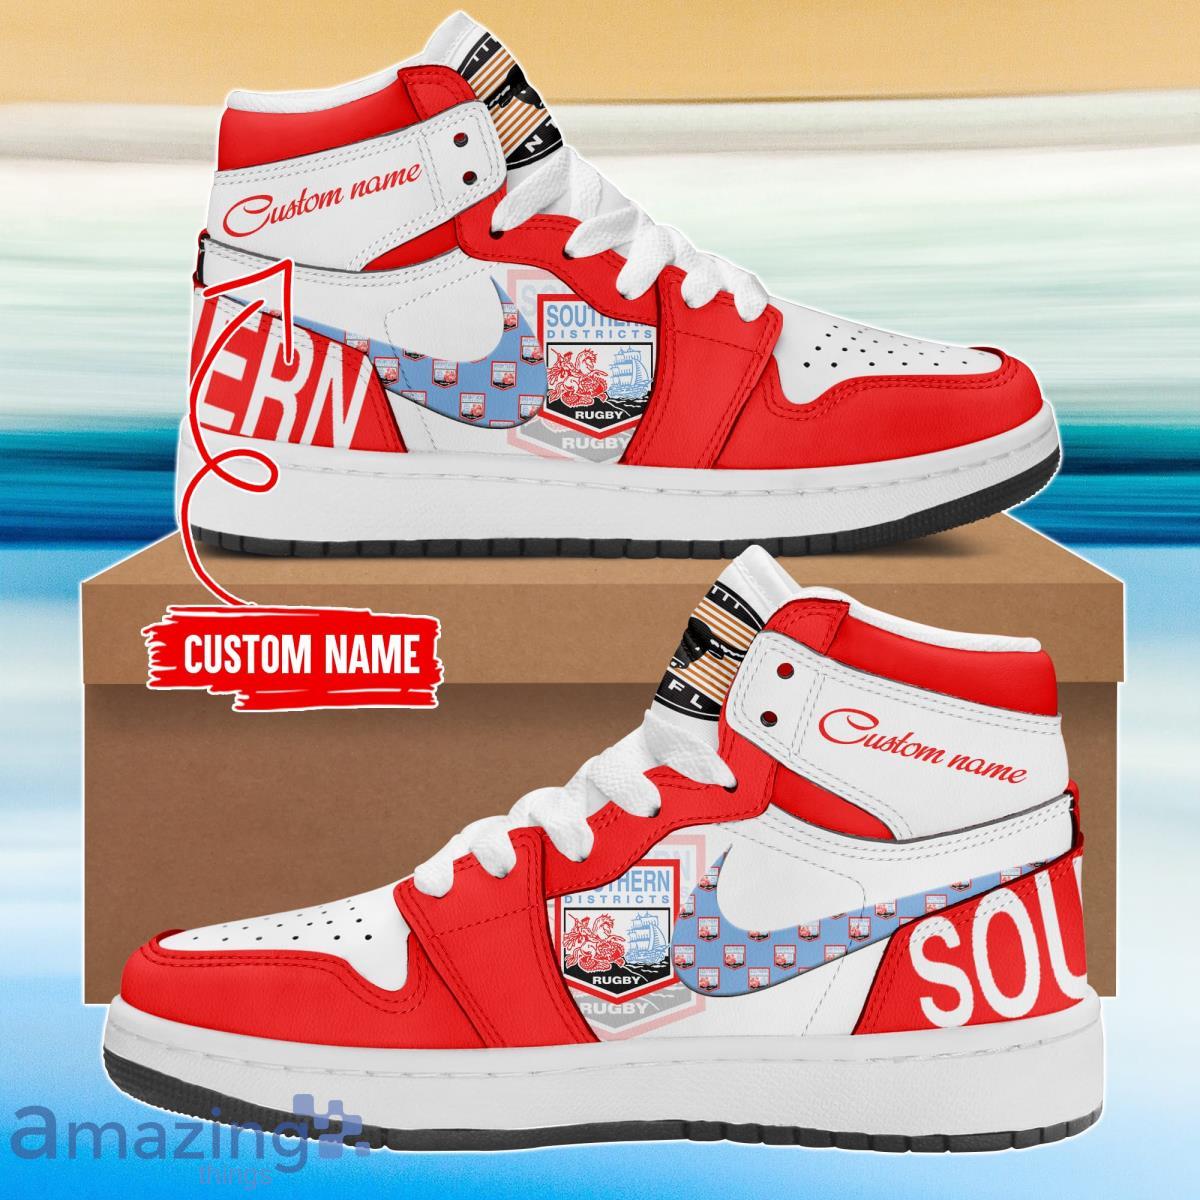 Southern Districts Rugby Club Air Jordan Hightop Sneaker Custom Name Product Photo 1